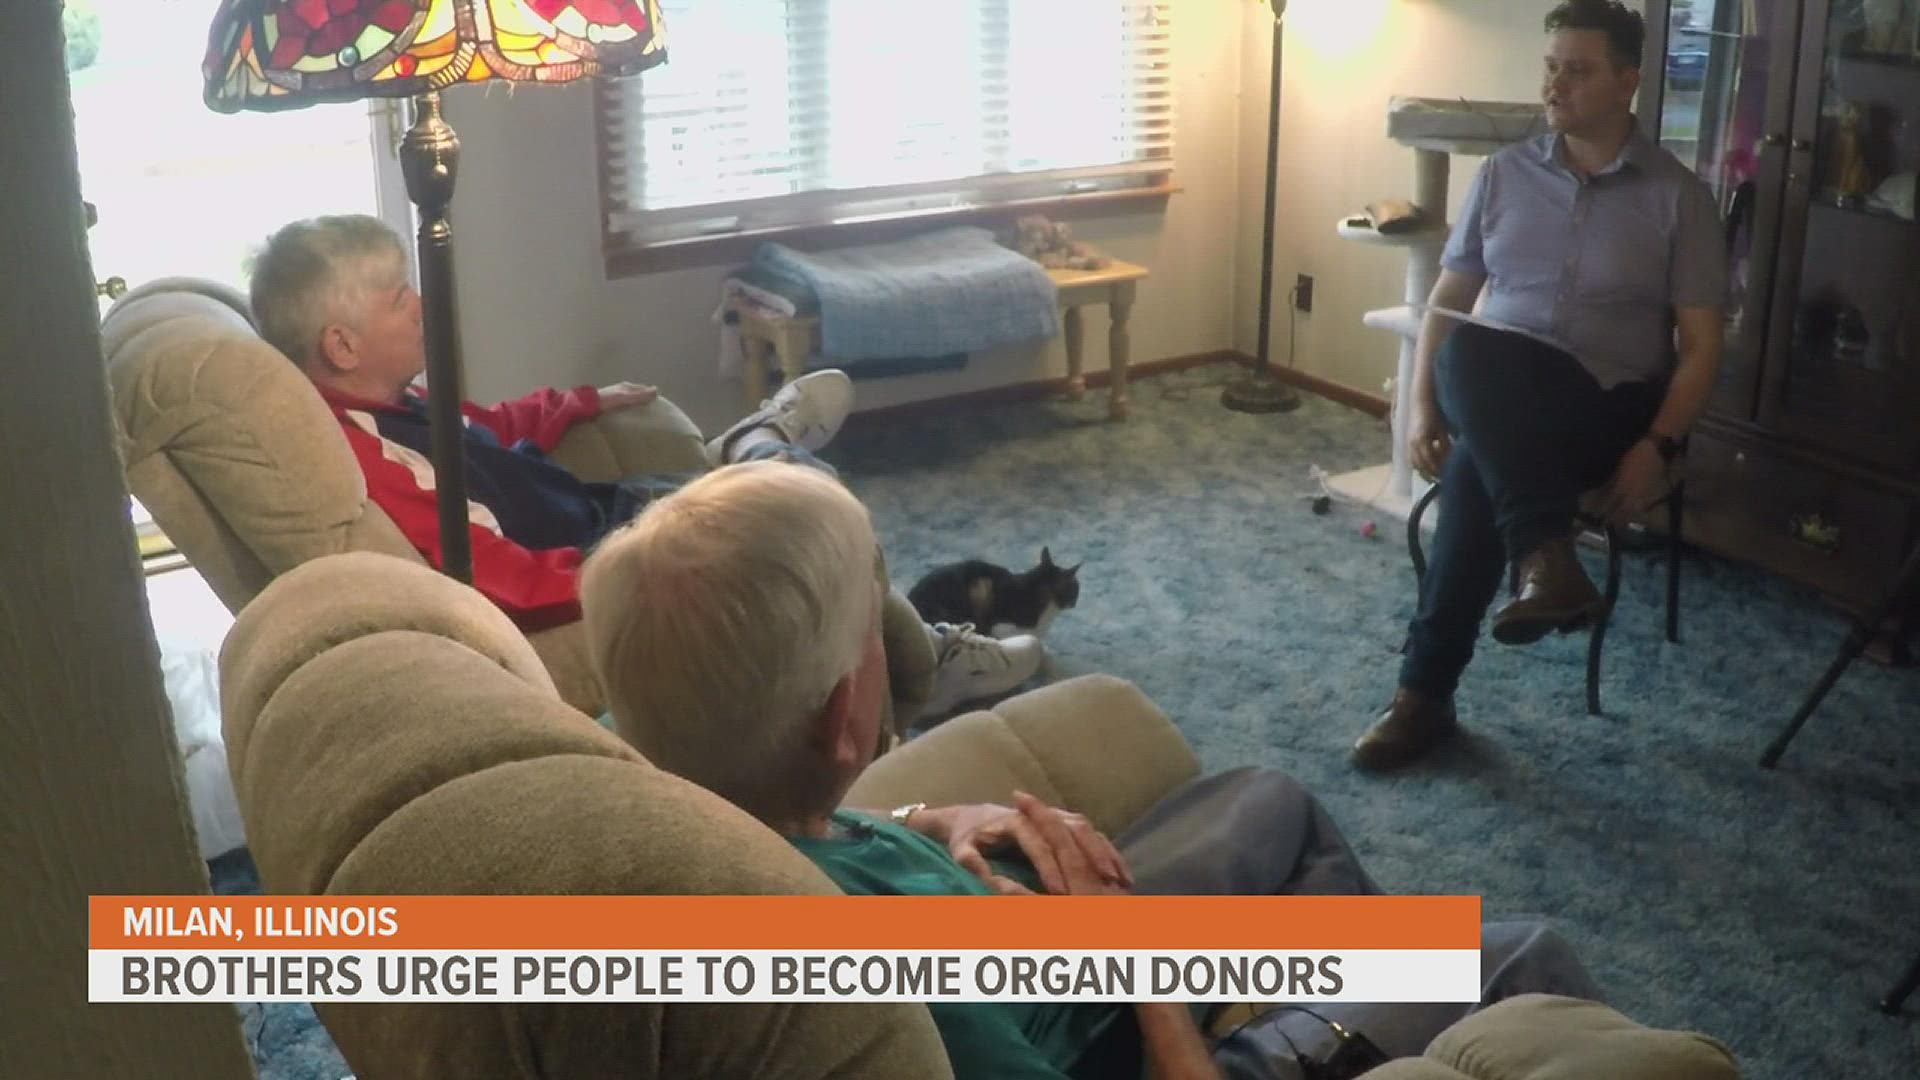 Pete and Dale already had their heart transplants. Rex is waiting. They are sharing their story to urge people to consider becoming an organ donor.